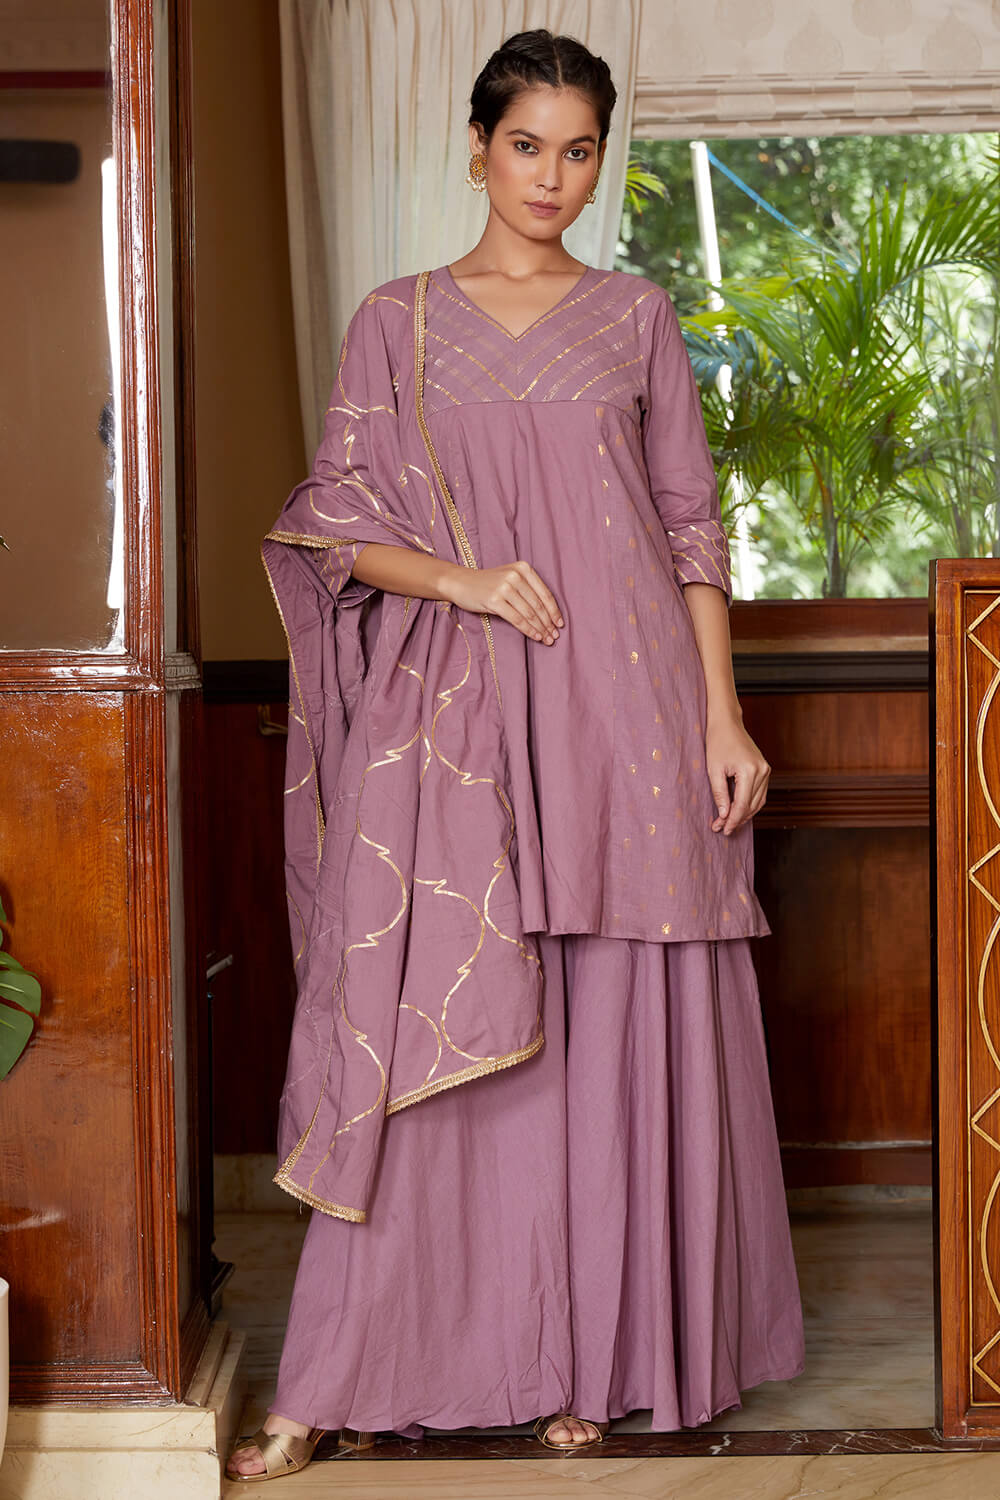 MOSF Sale - Flat 50% on Indian Dresses Online Shopping - Business